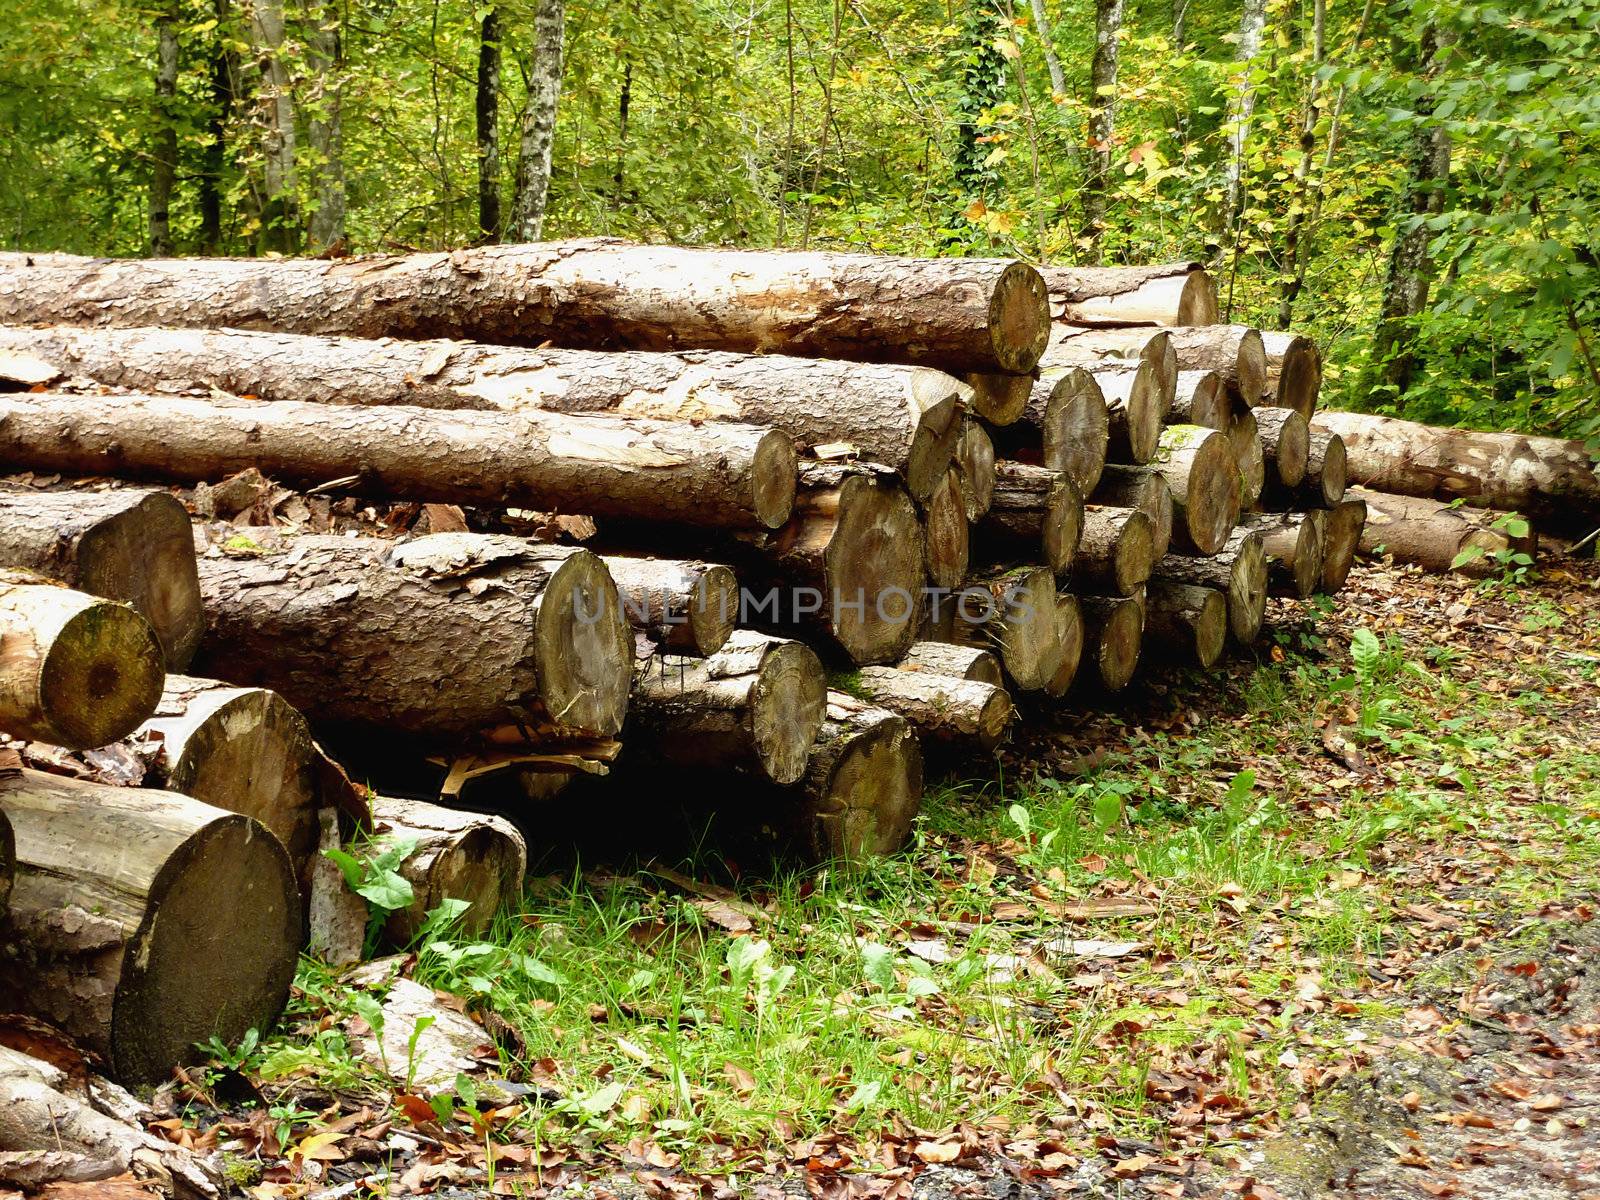 Pile of trunks in forest with lots of trees